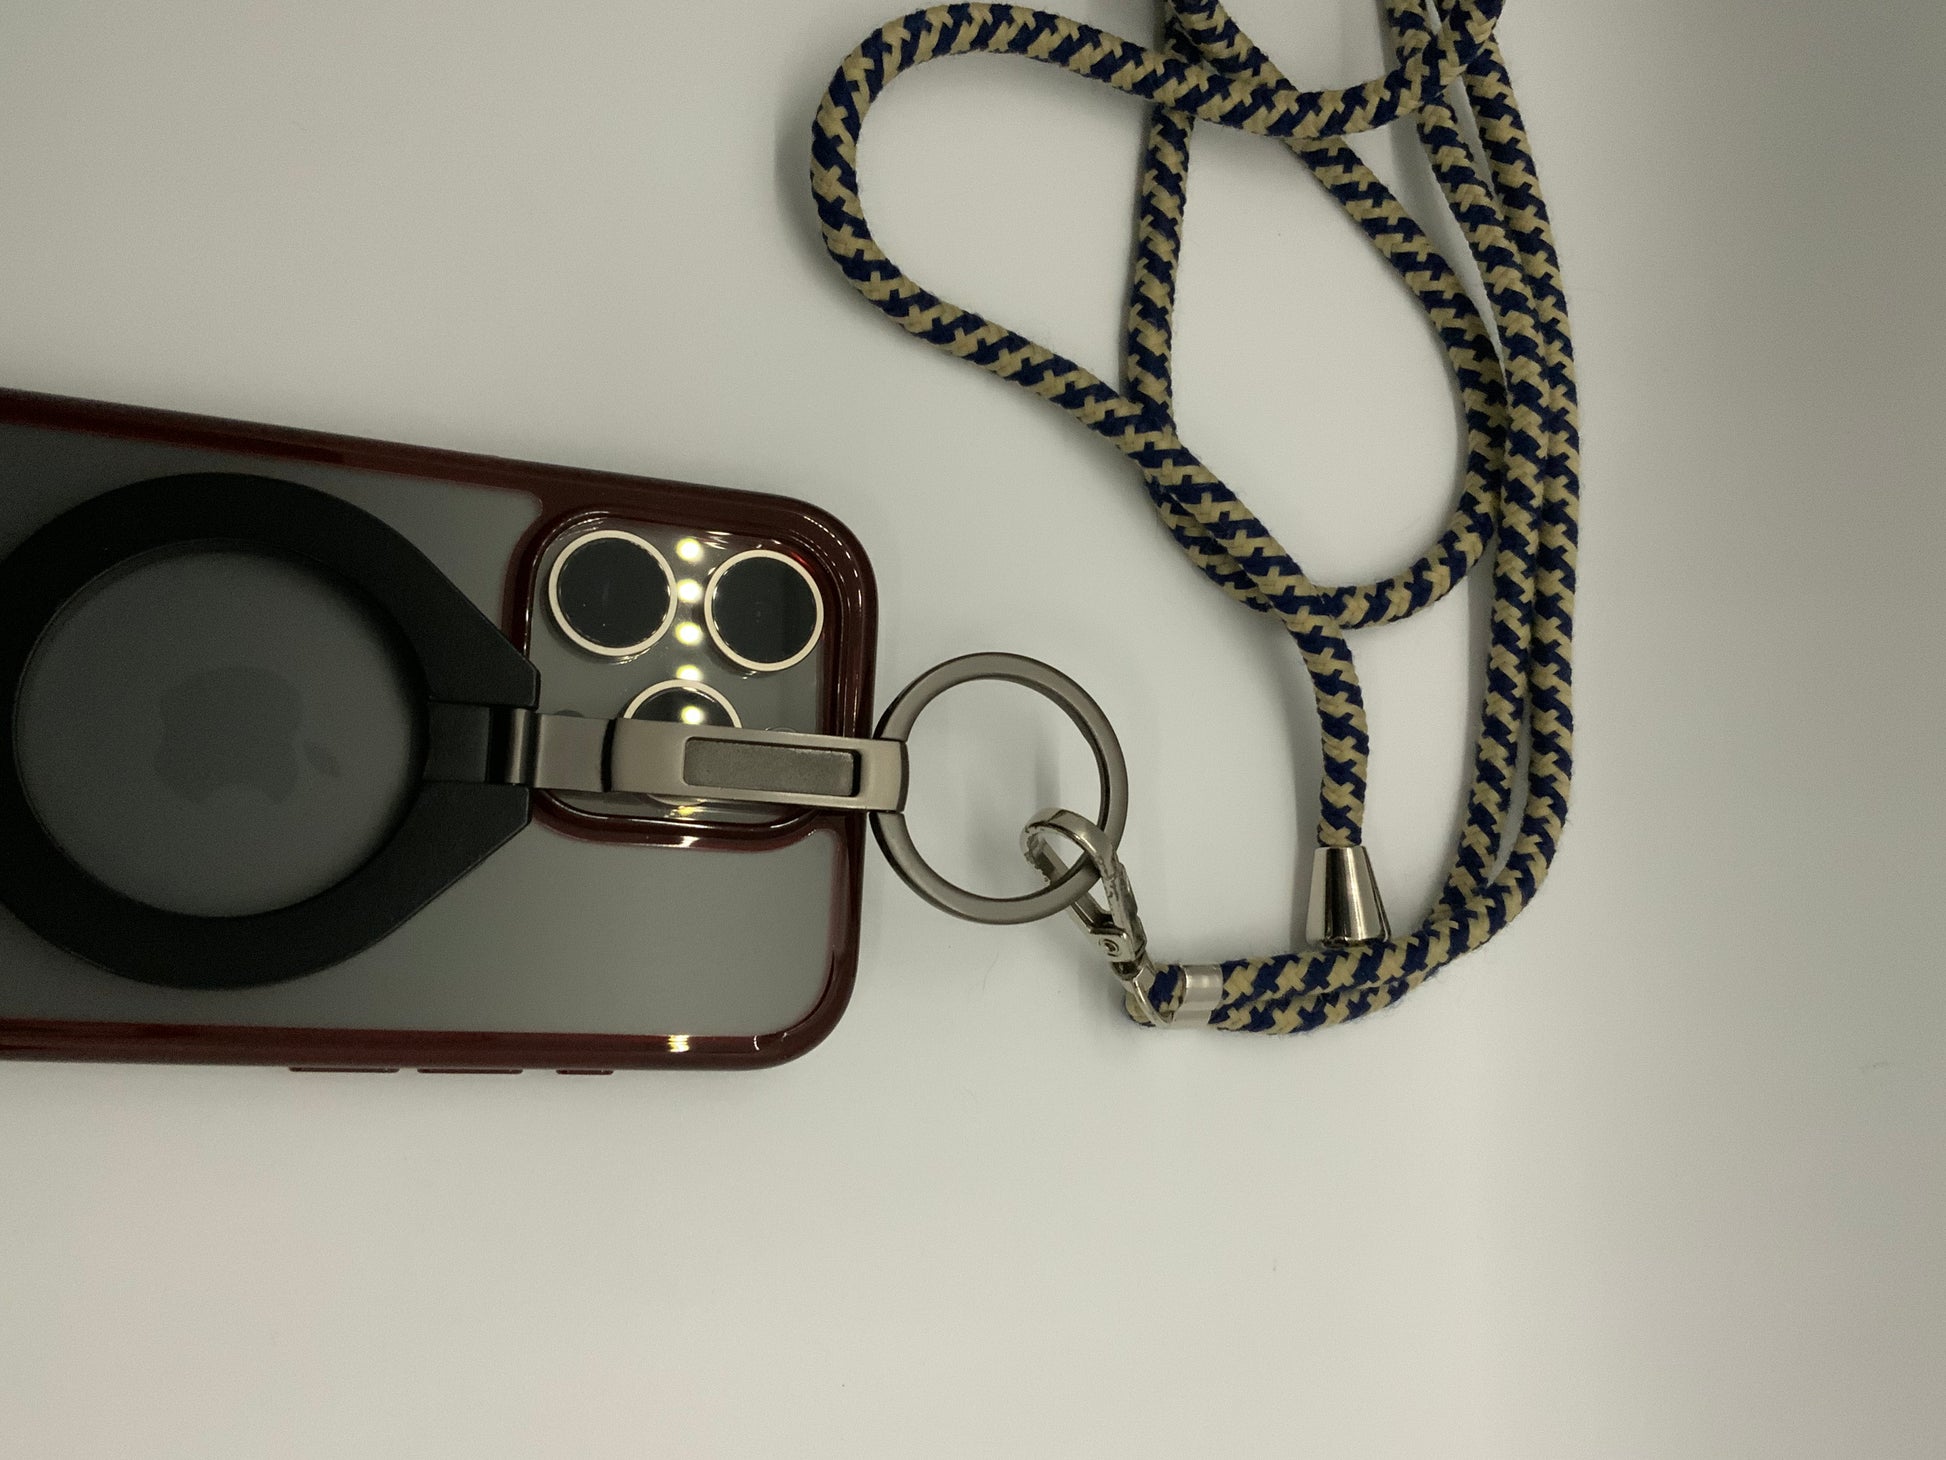 Be My AI: The picture shows a phone with a case and a lanyard attached to it. The phone case is transparent with a black circular ring in the middle, possibly for holding or standing the phone. The case has a maroon border. The camera cut-out on the case is square with rounded edges and shows three camera lenses and a flash. 

Attached to the case is a lanyard with a metal clip. The lanyard is made of fabric and has a zigzag pattern in dark blue and beige colors. The metal clip is silver and is attached to 